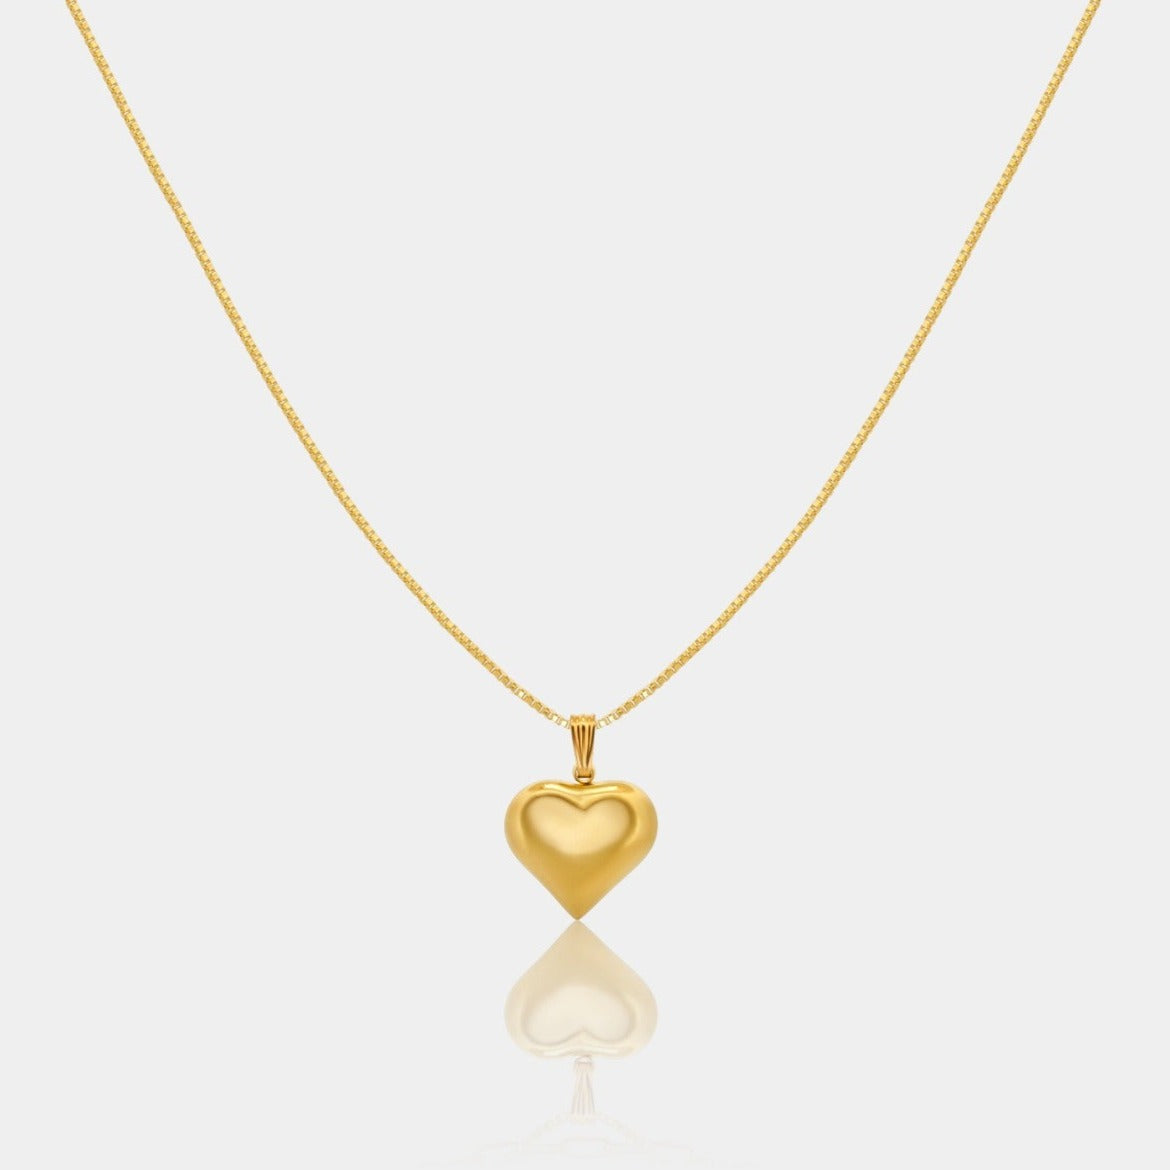 14k Gold fill heart pendant necklace